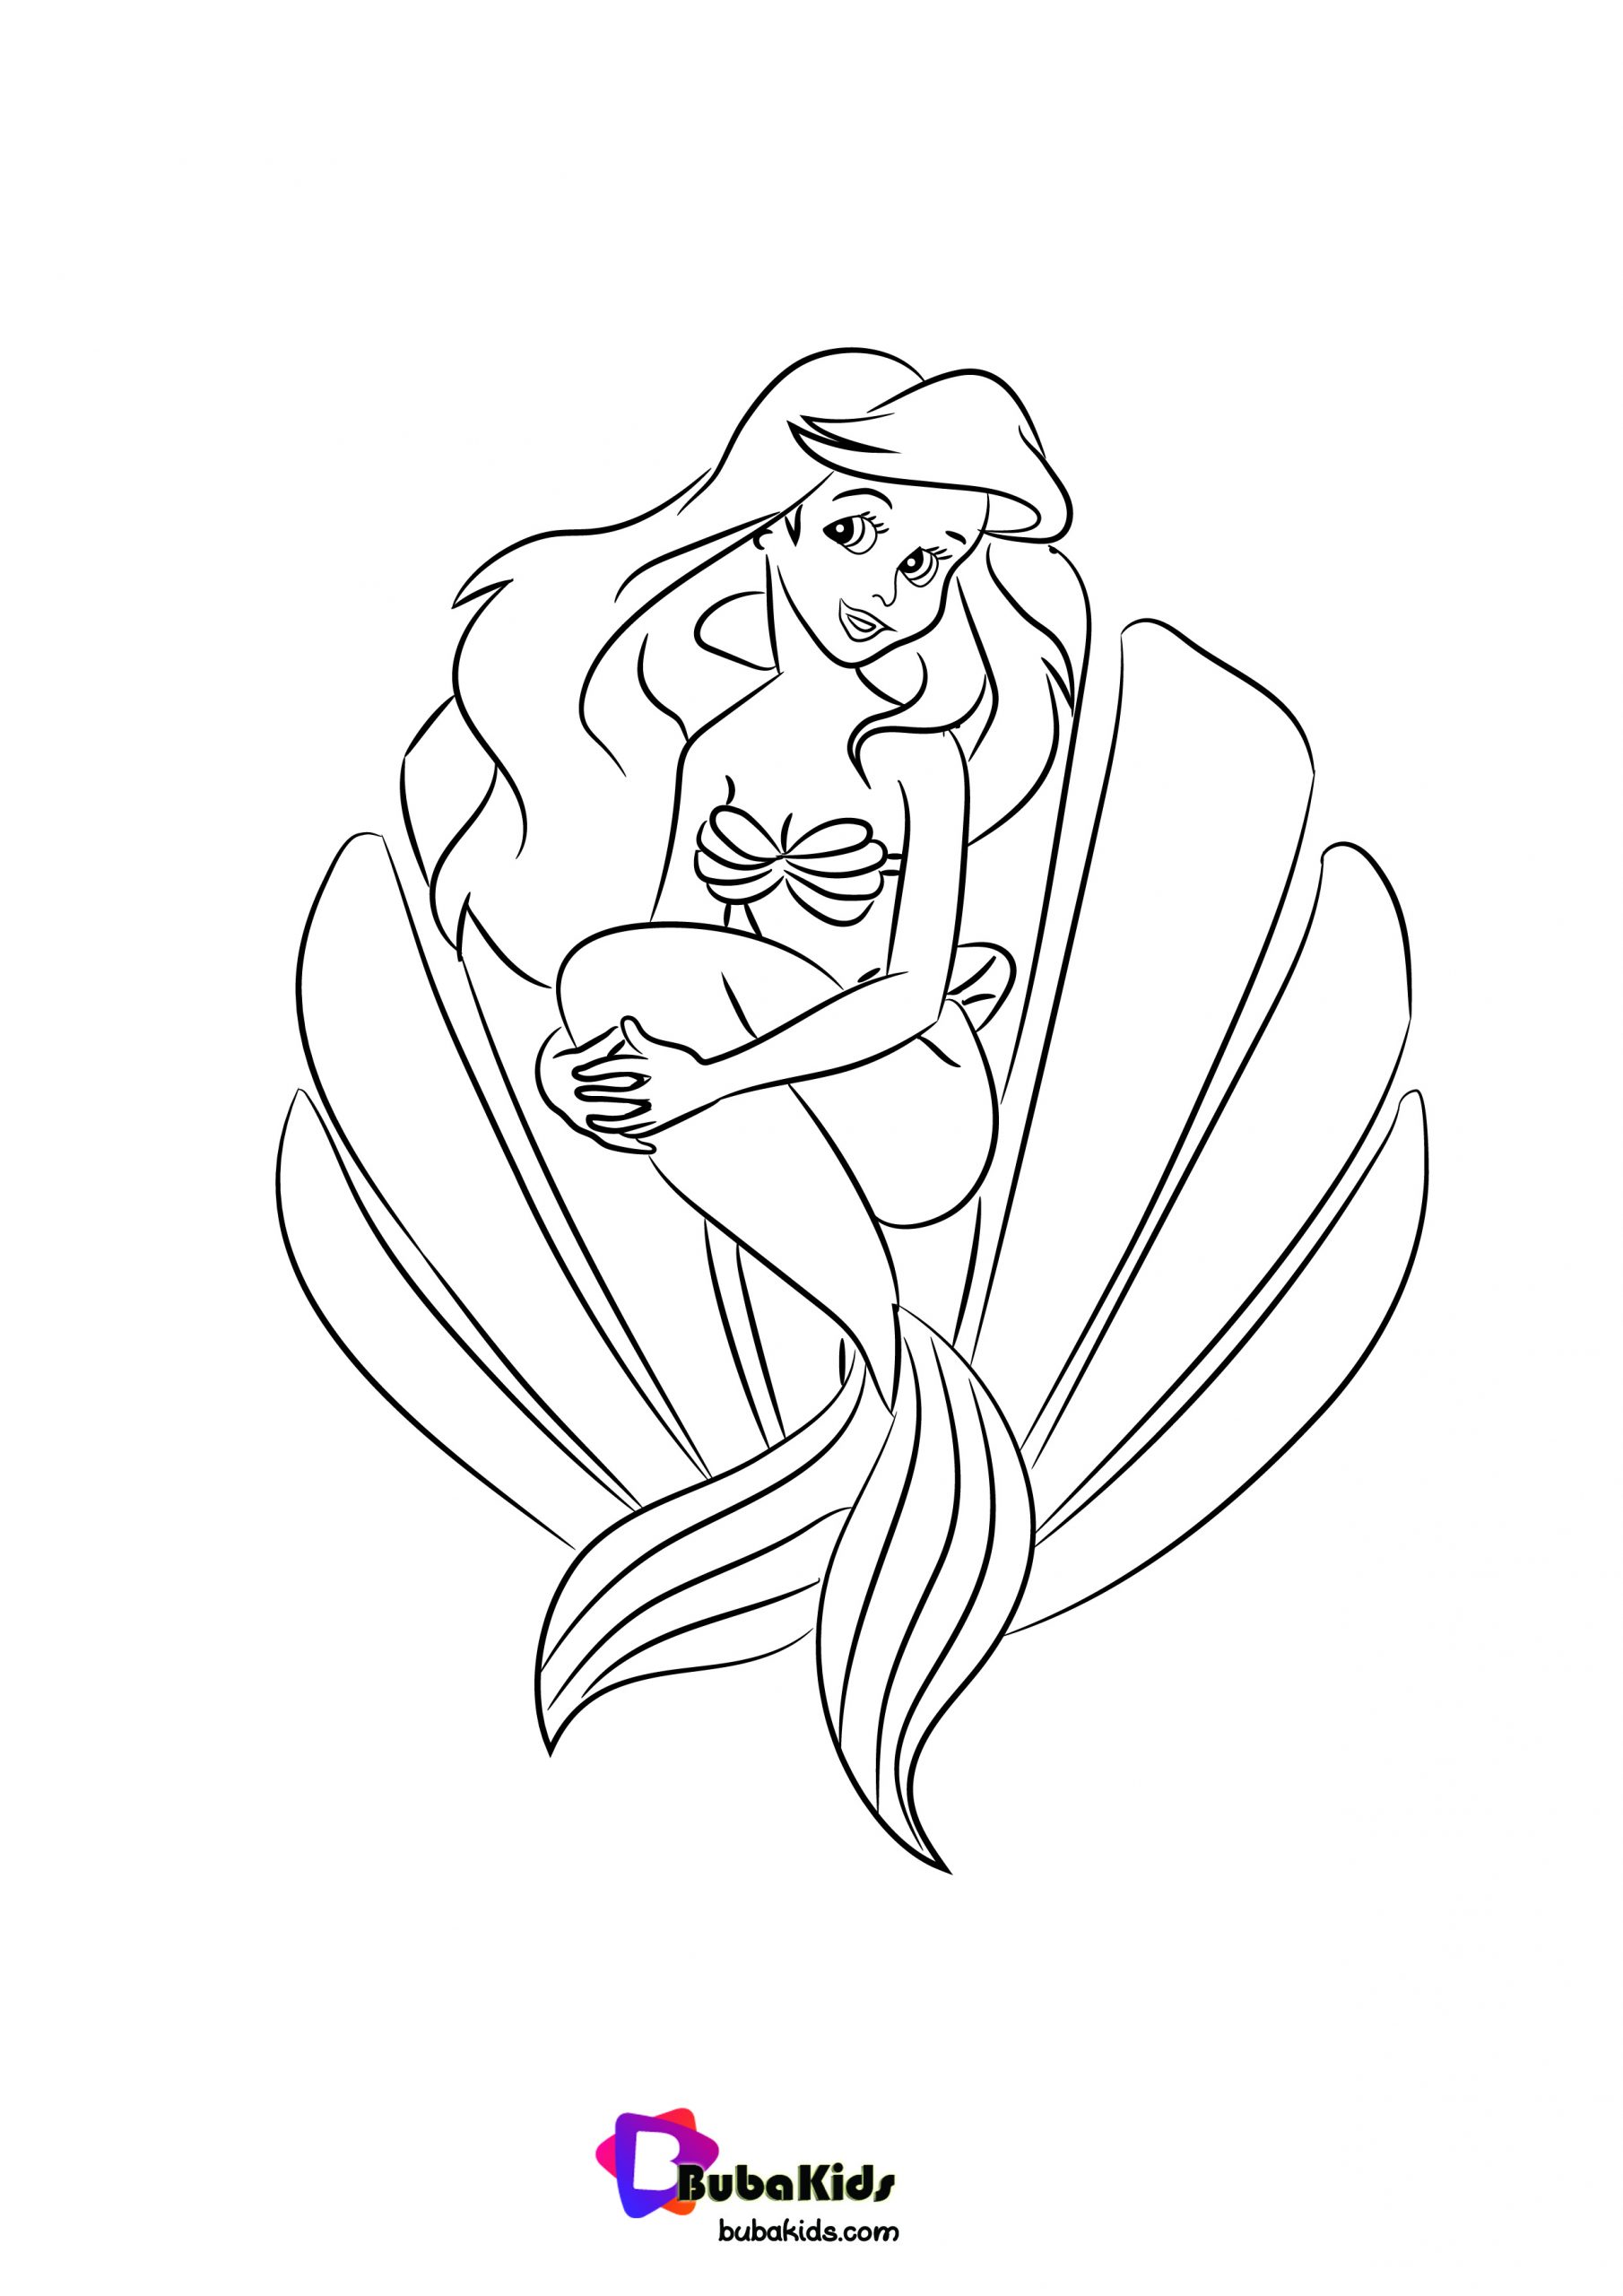 Princess Ariel Coloring Pages Printable By Bubakids Wallpaper